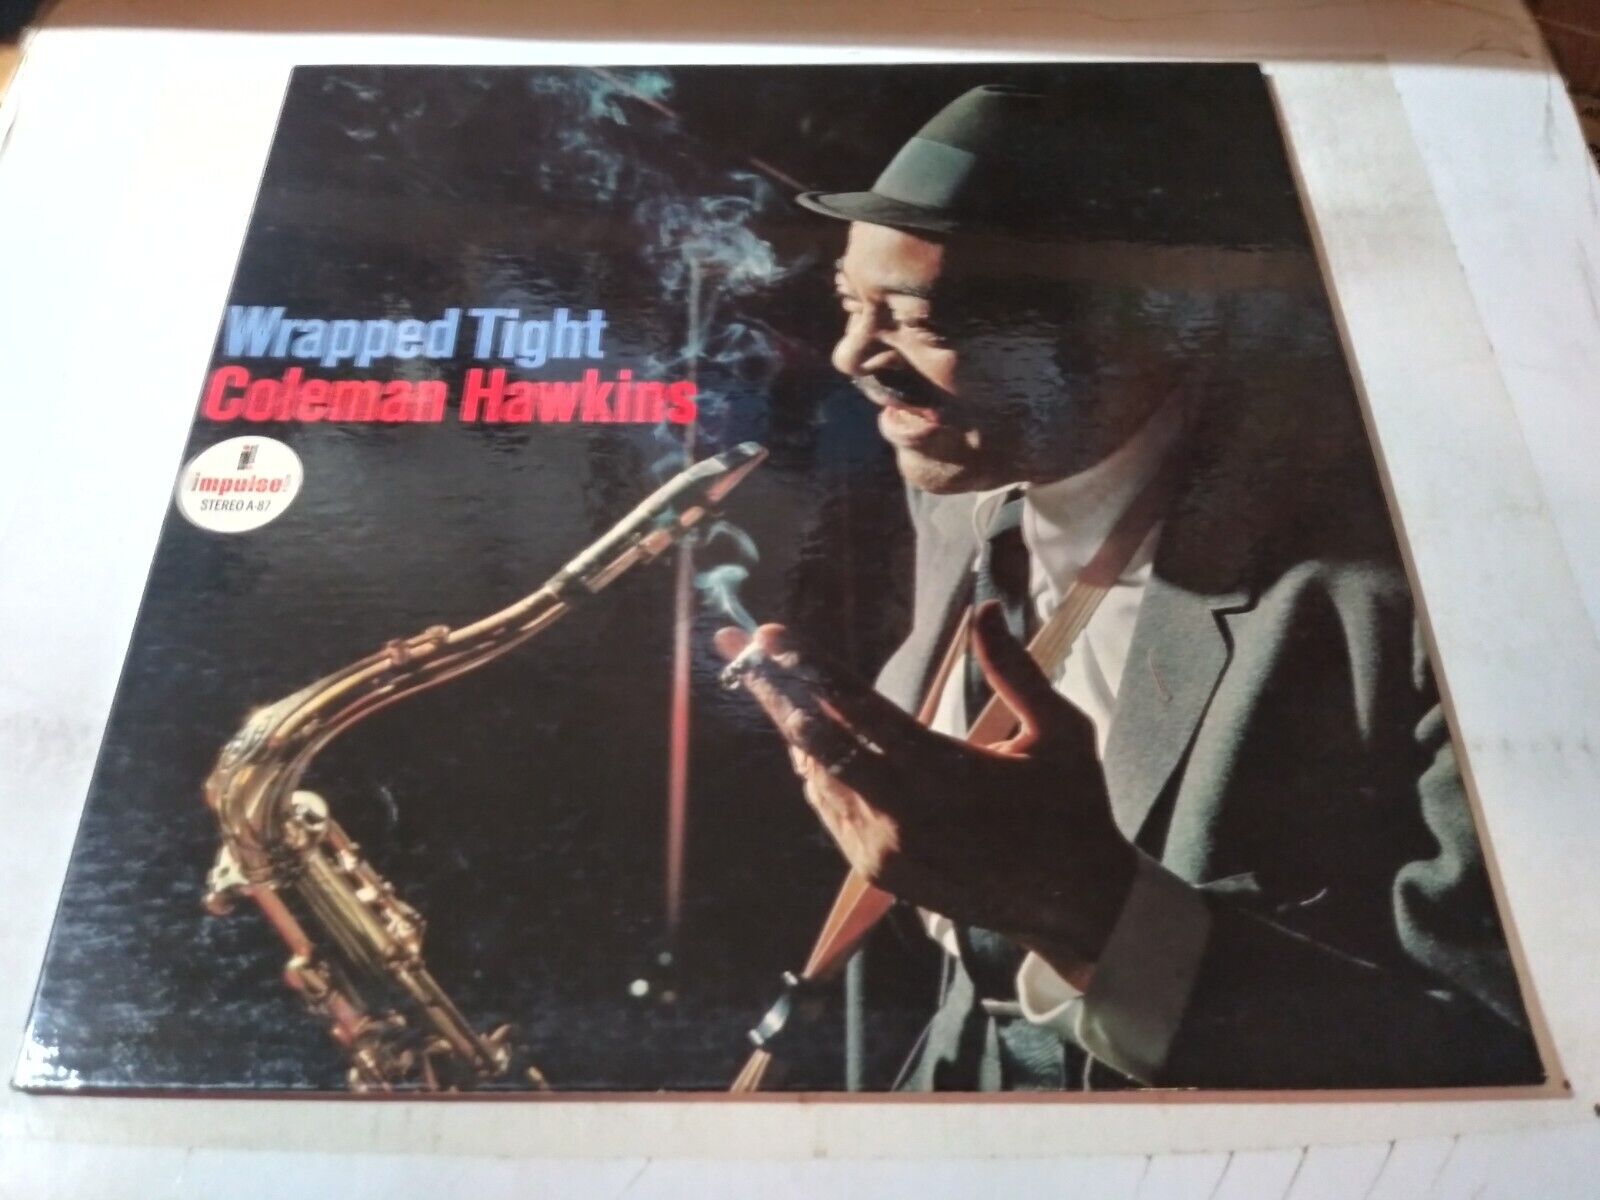 Coleman Hawkins – Wrapped Tight VG+ Original Stereo Impulse AS-68 Record 1965